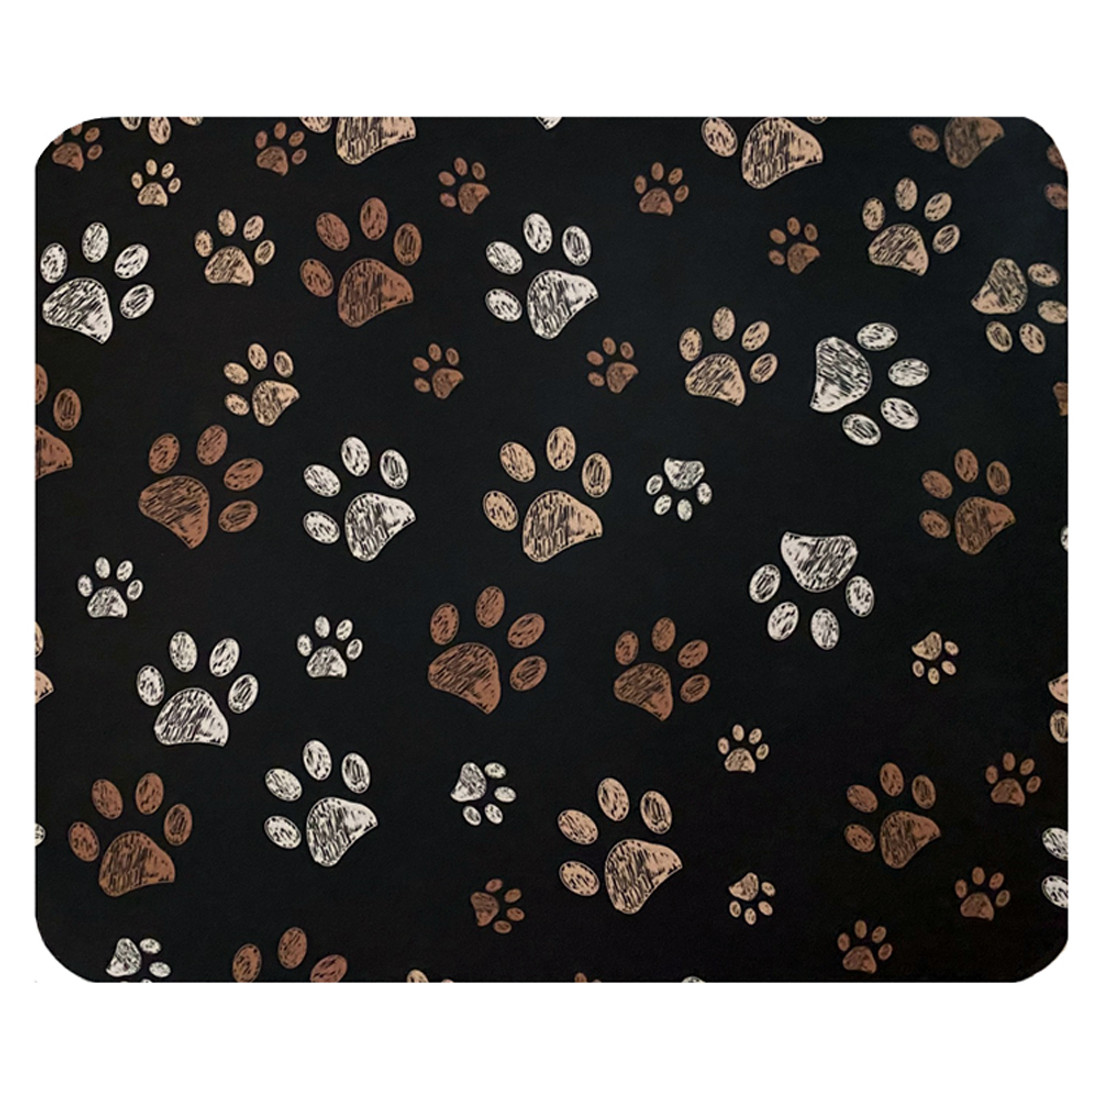 Doggy Paw Prints Mouse Pad Mat